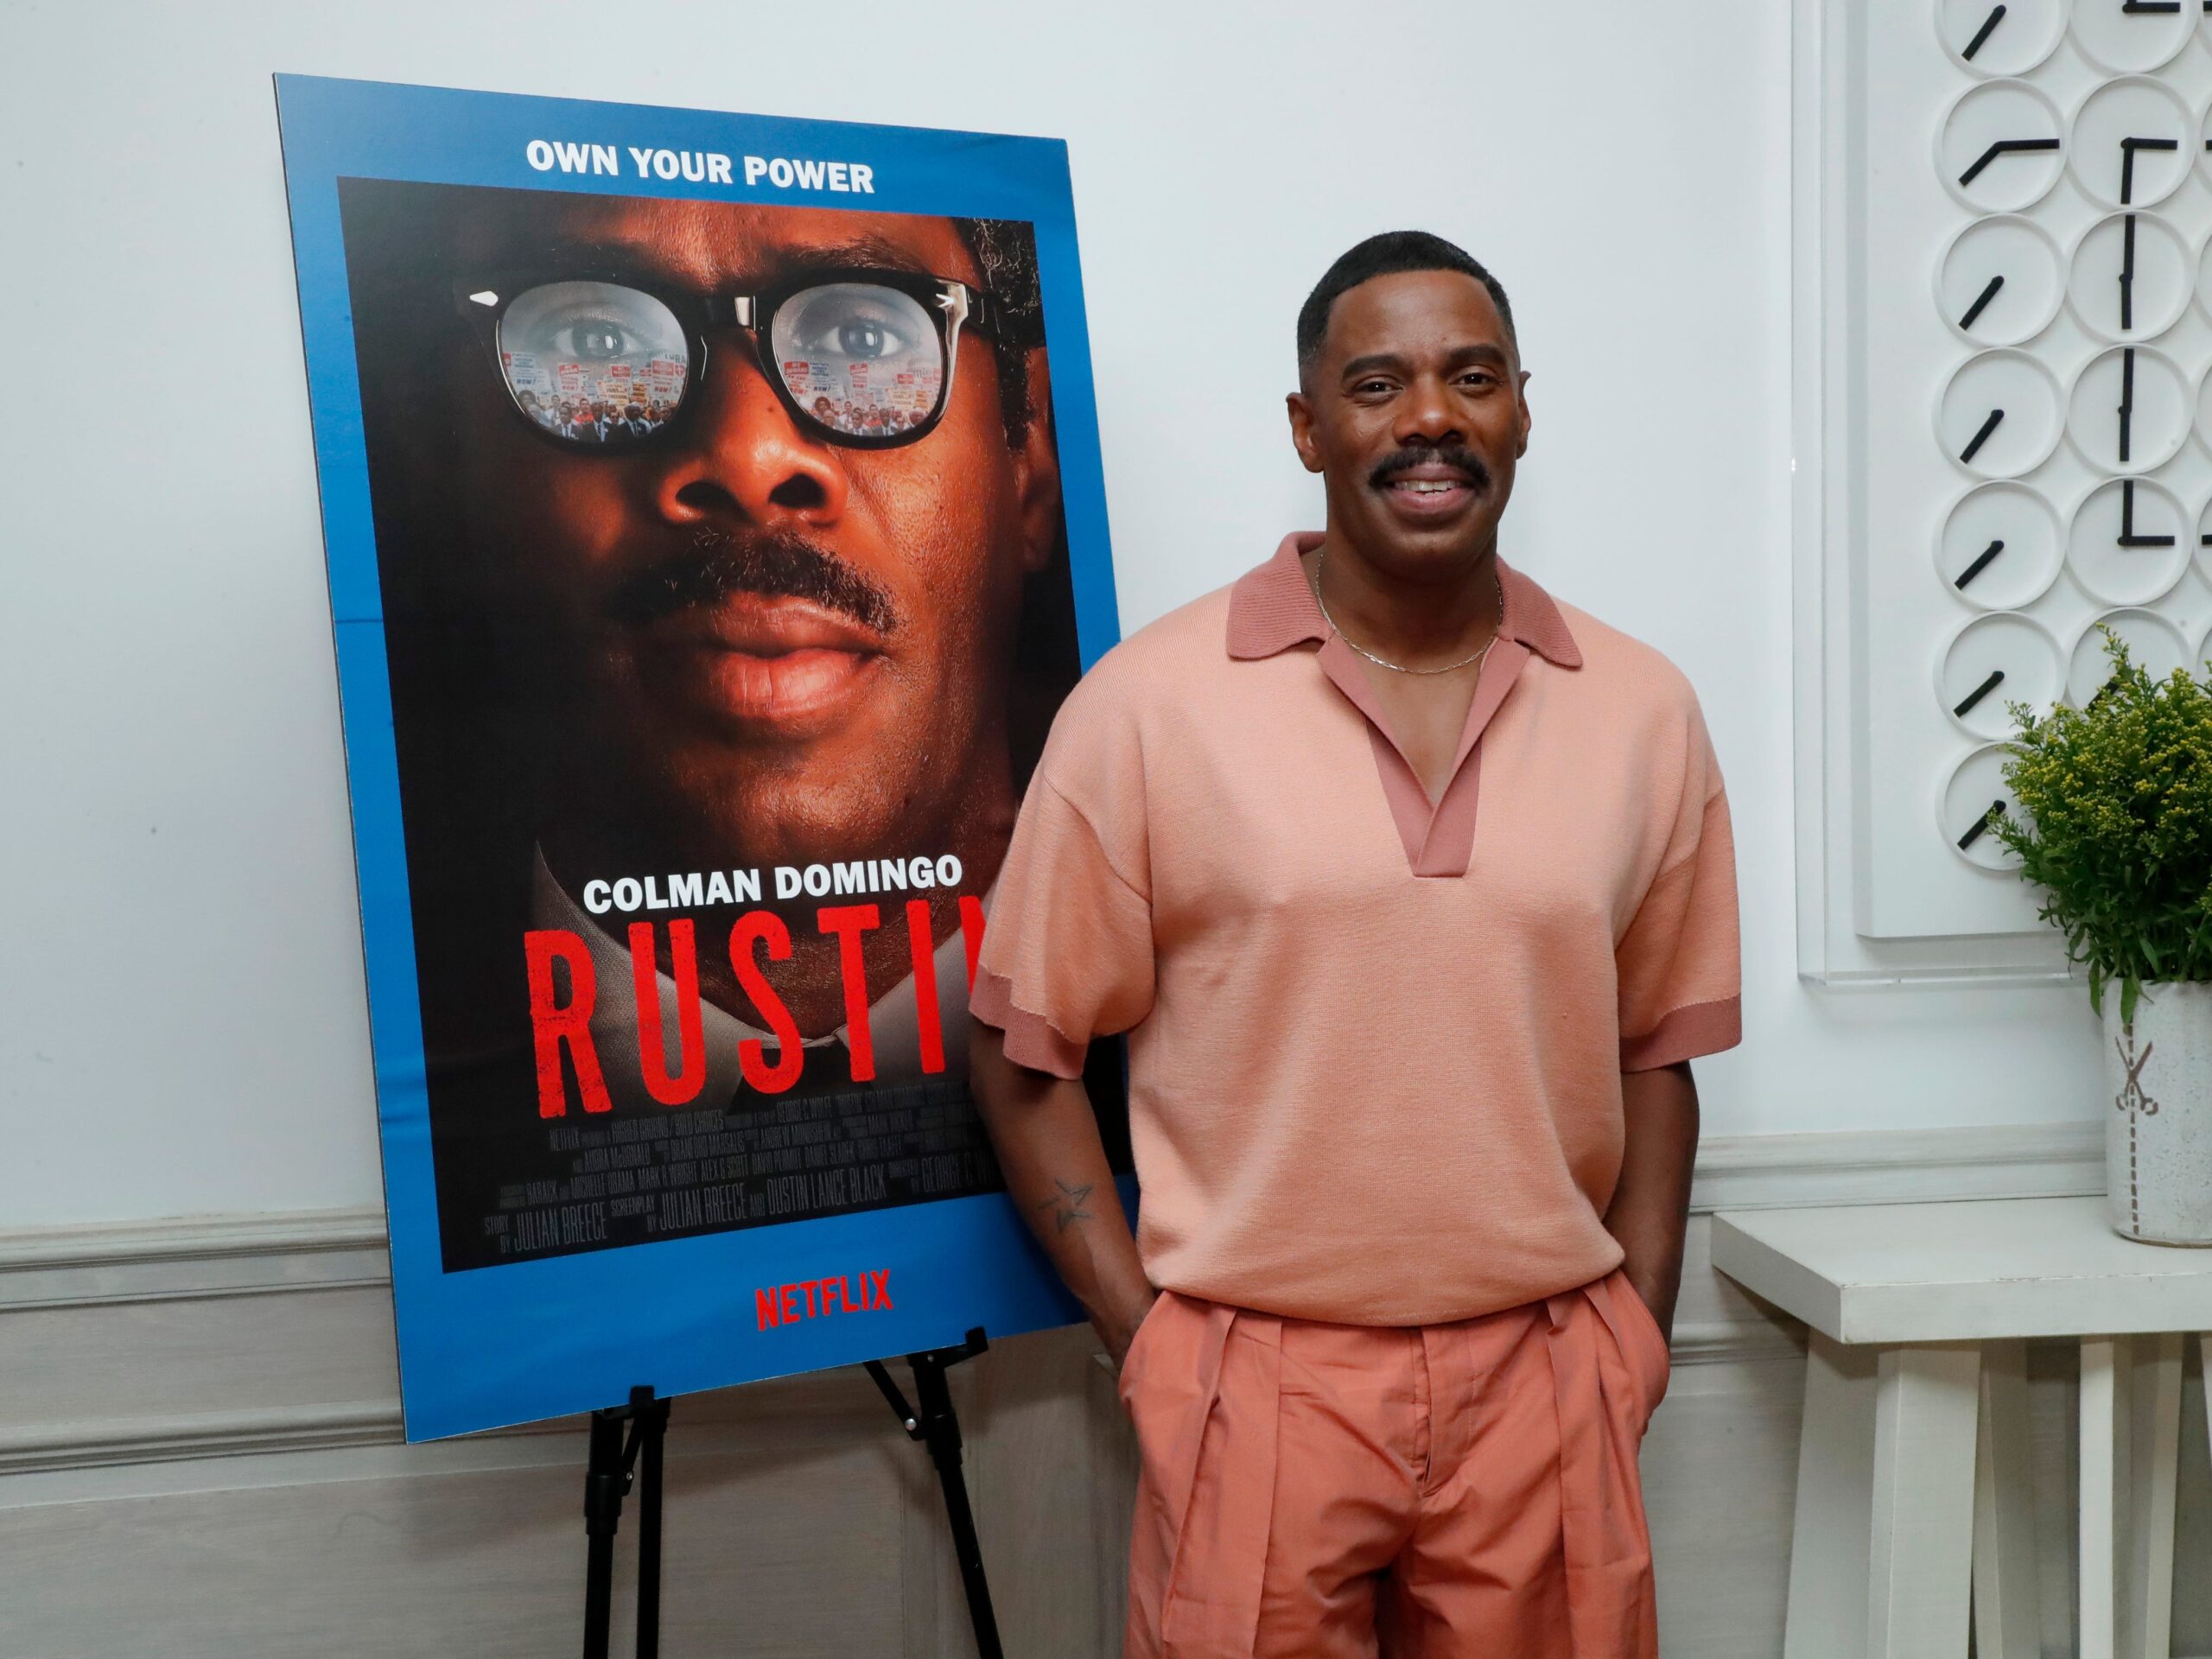 Oscar nominee Colman Domingo in front of a poster for the film Rustin.